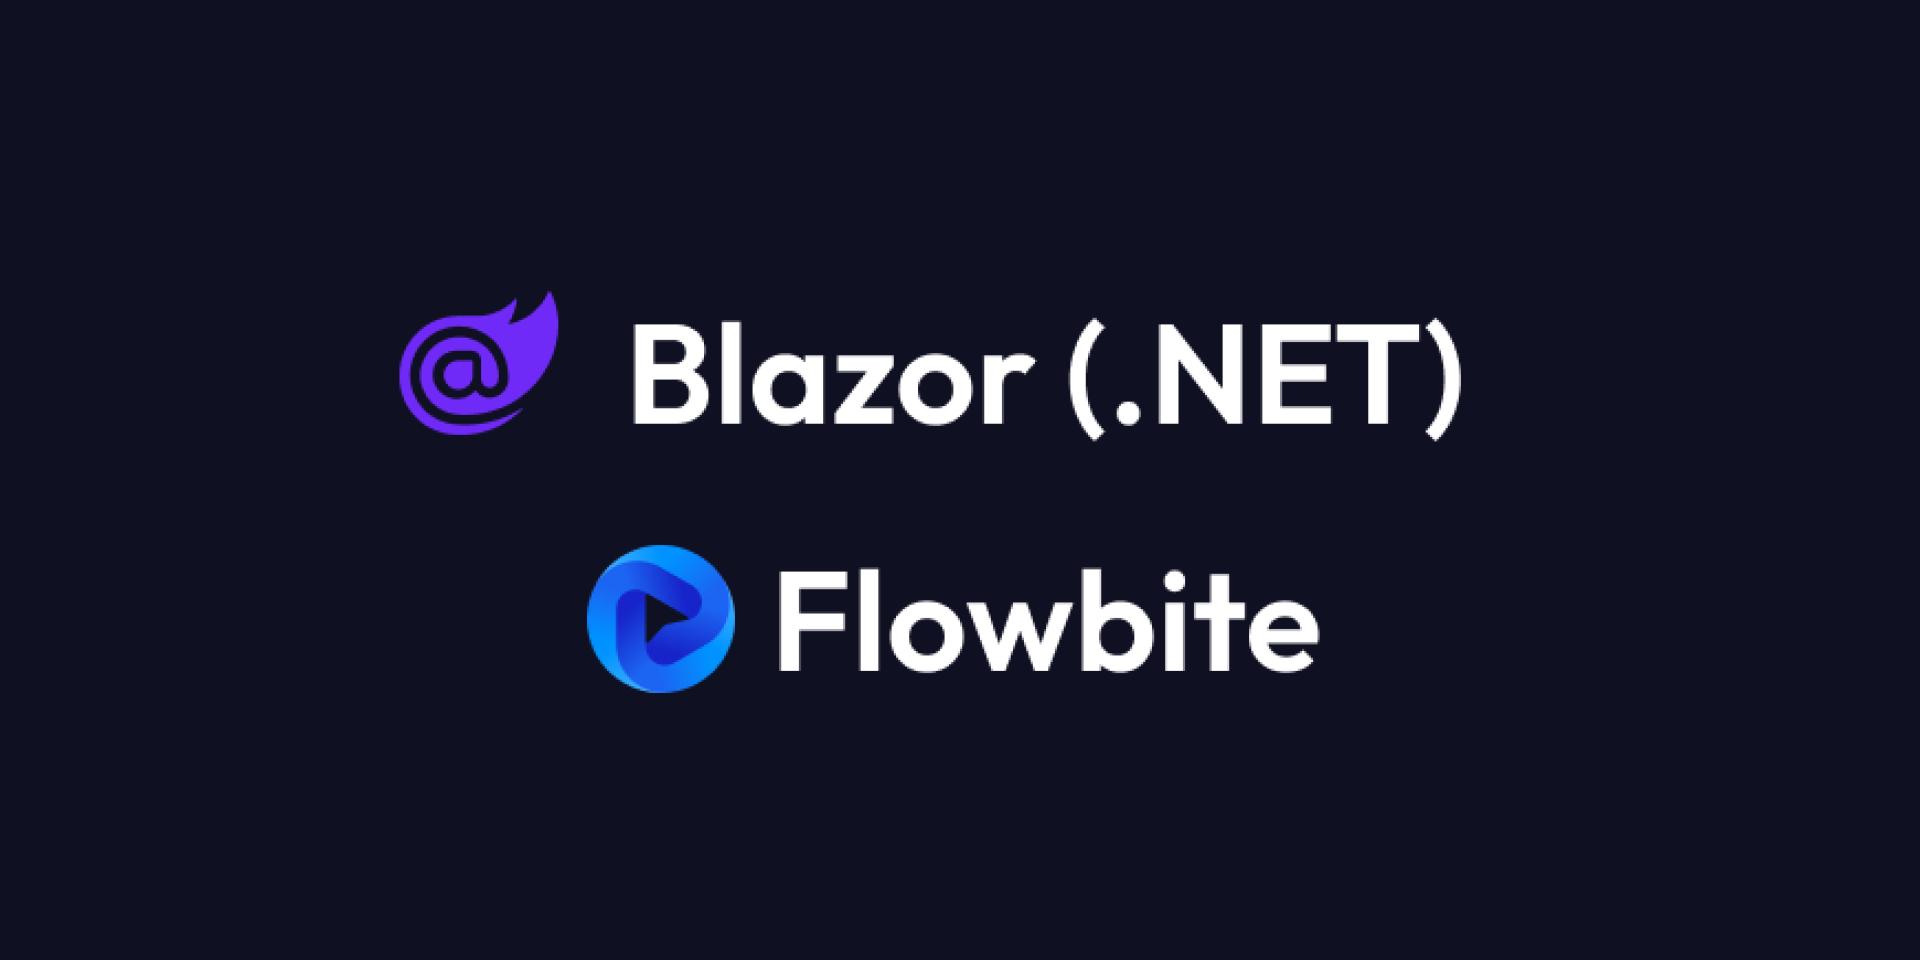 How to install Blazor (.NET) with Flowbite and Tailwind CSS